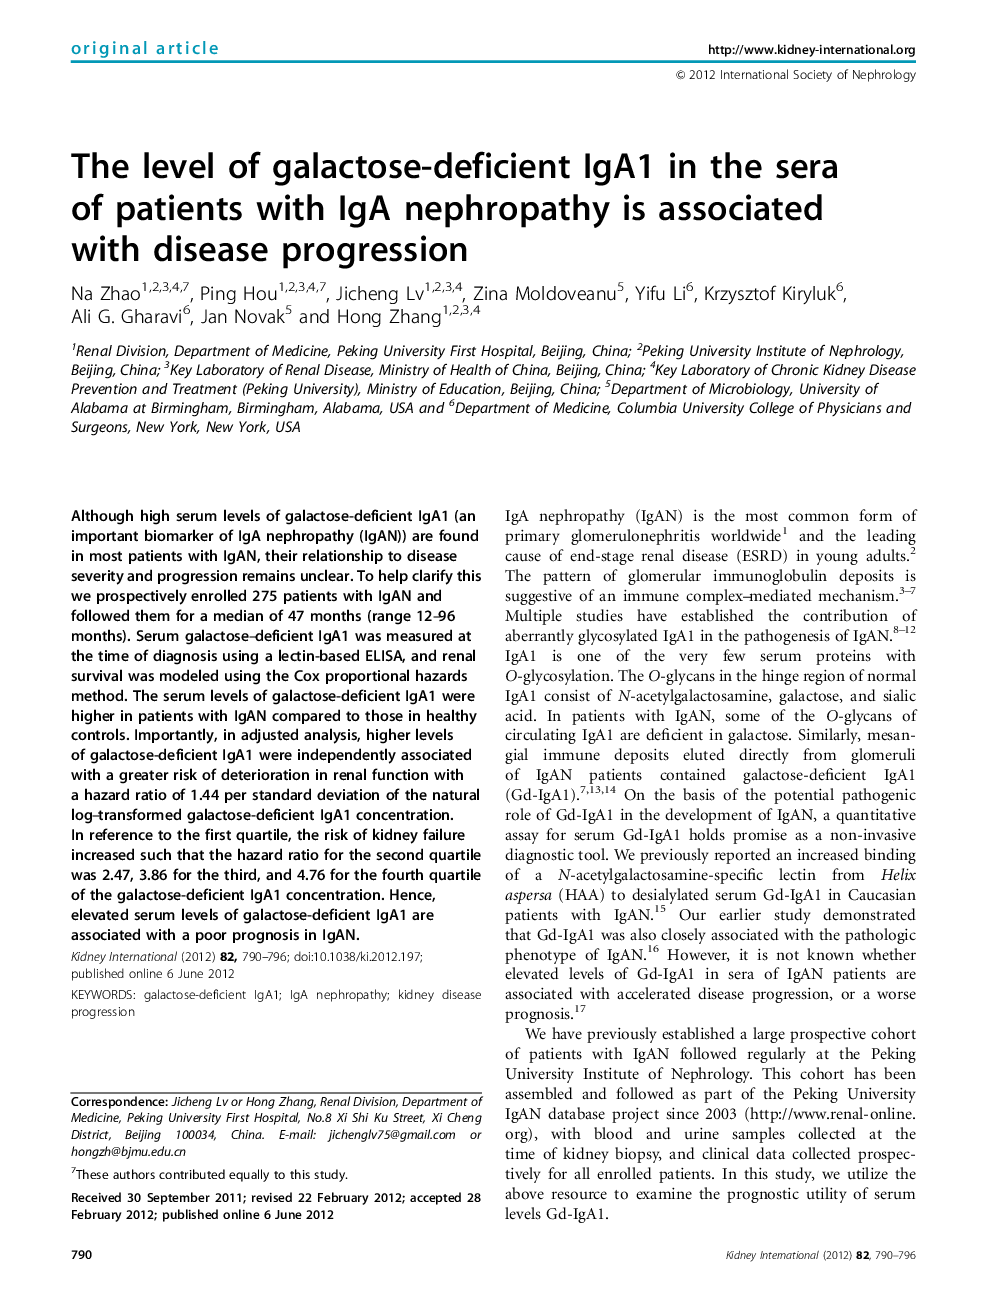 The level of galactose-deficient IgA1 in the sera of patients with IgA nephropathy is associated with disease progression 